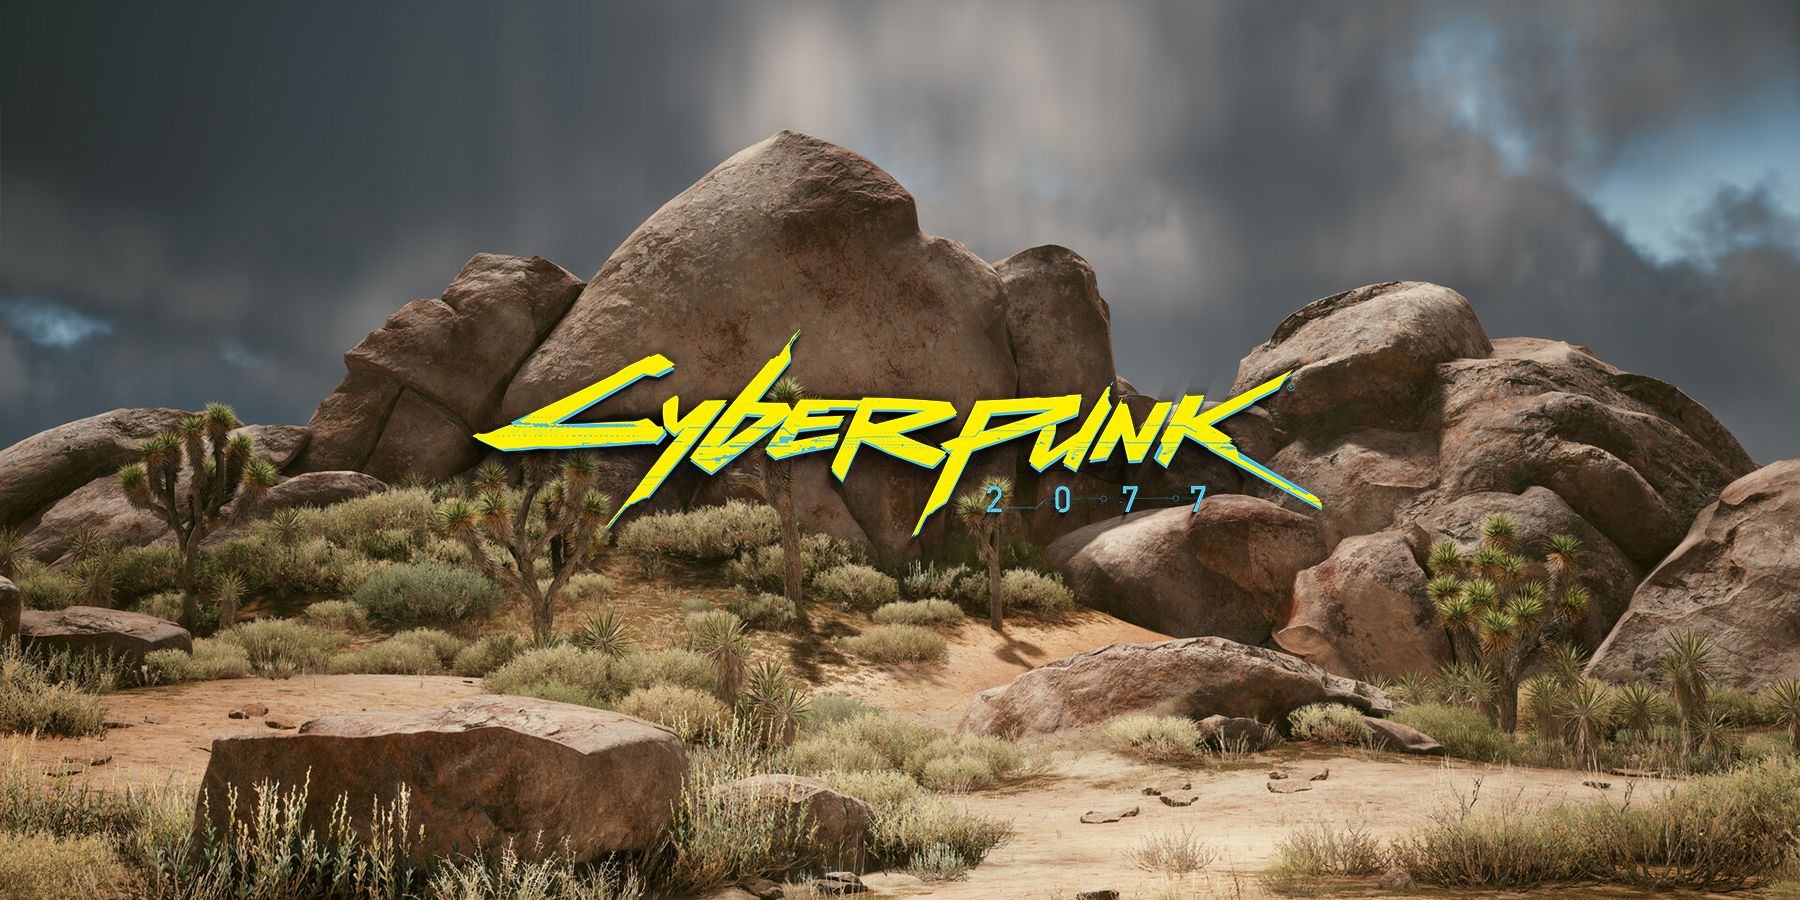 Cyberpunk 2077 Player Gets Yelled at by a Rock in the
Badlands